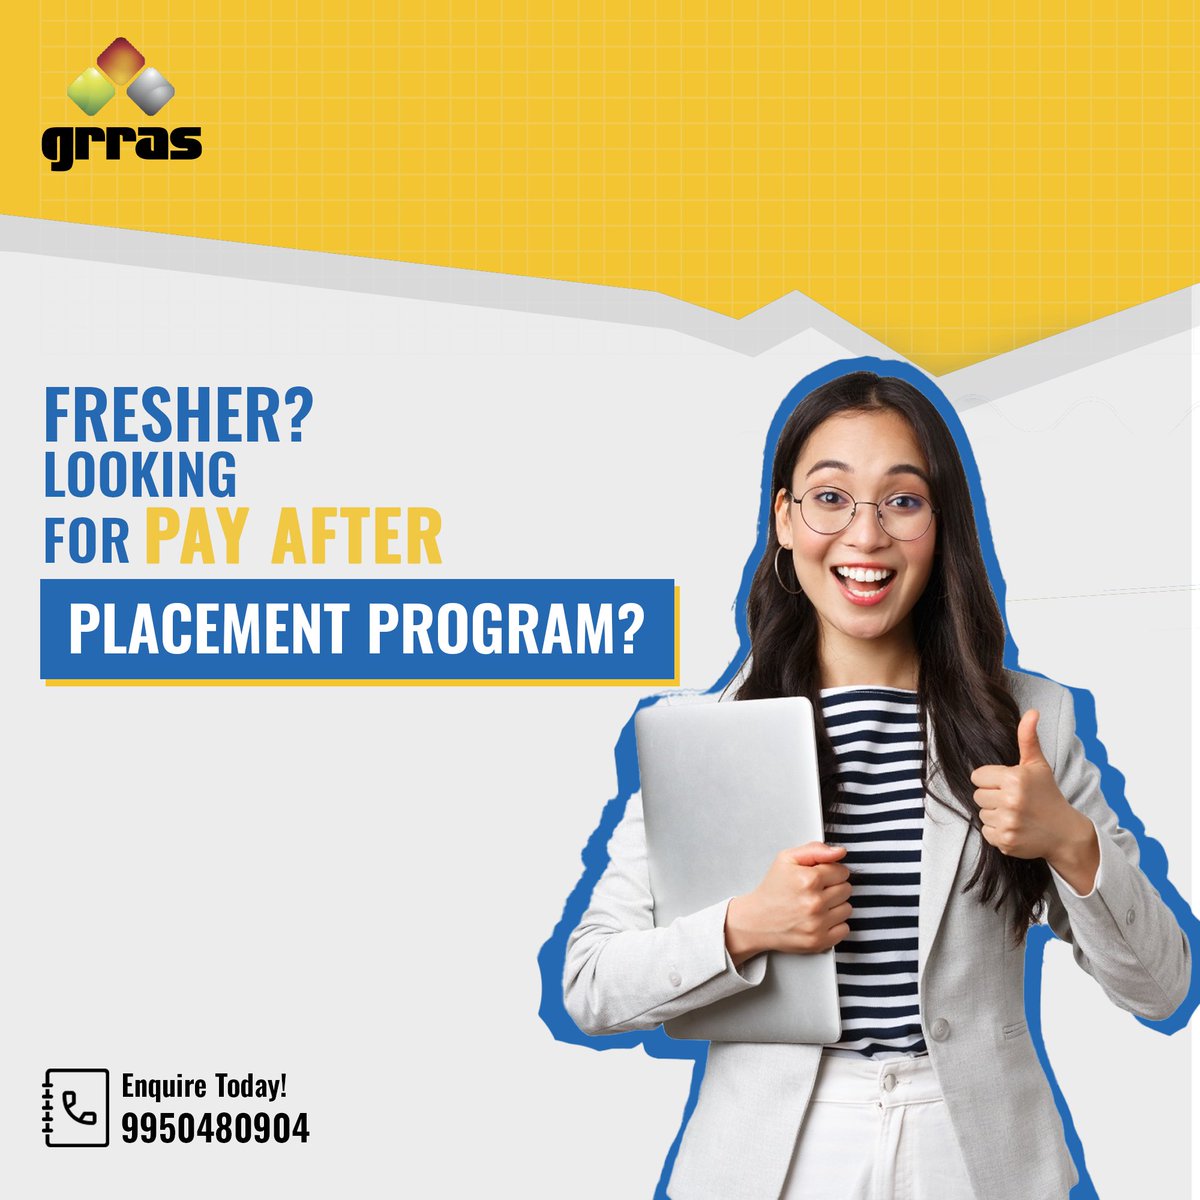 👉🏻𝐀𝐫𝐞 𝐘𝐨𝐮 𝐅𝐫𝐞𝐬𝐡𝐞𝐫? 
 Looking for a Pay after Placement Program? 
 Enquire Today!
📞 call- 99504 80904
#devops #cloudcomputing #aarambhyourcareer #aarambh #grras #grrassolutions #joborientedcourses